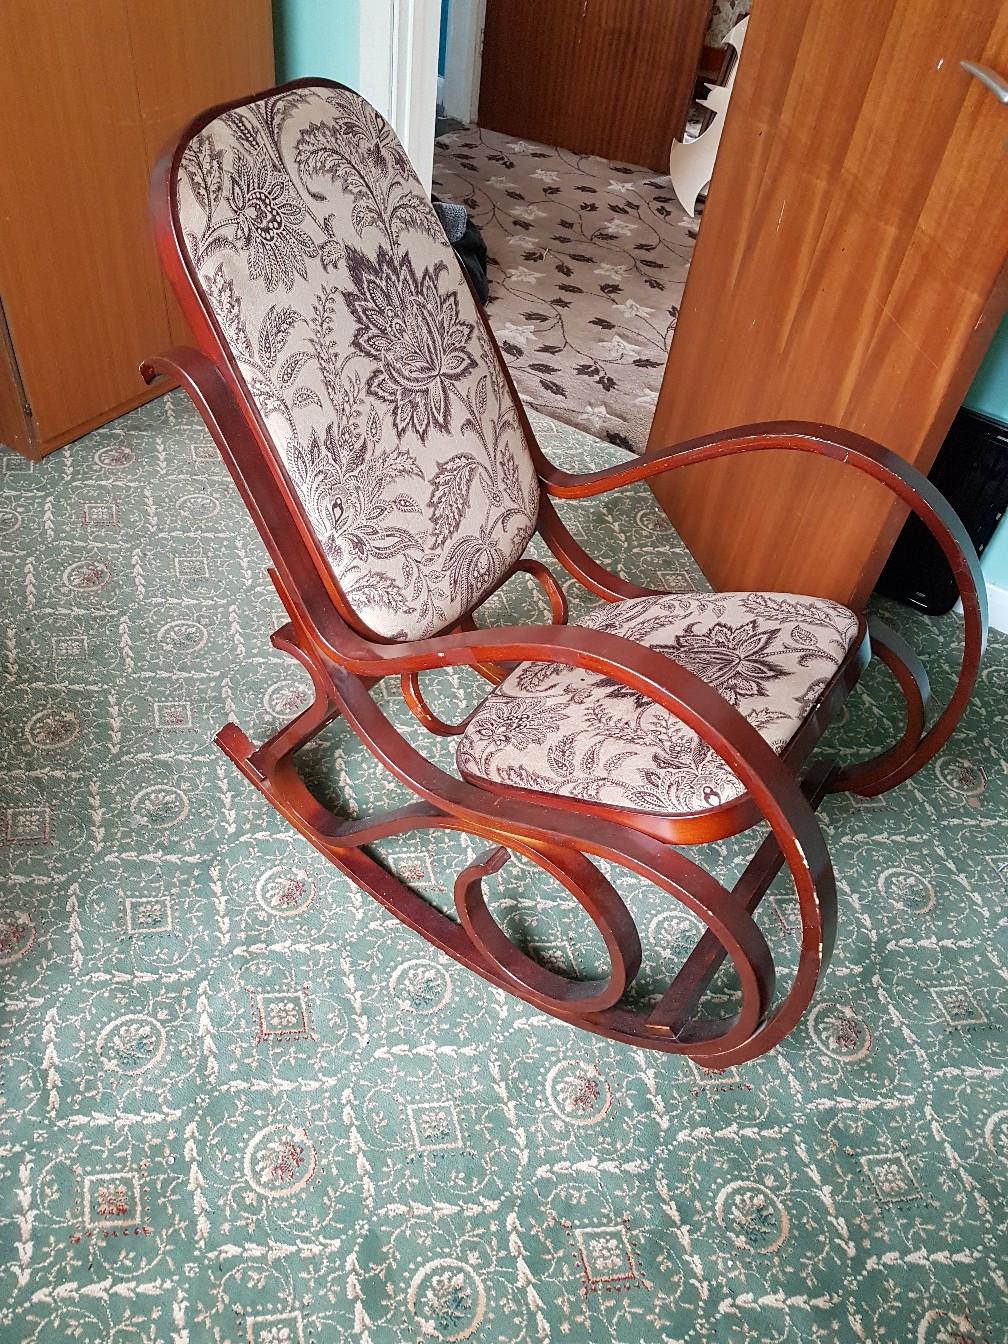 used widen rocking chair in LS12 Leeds for £30.00 for sale | Shpock